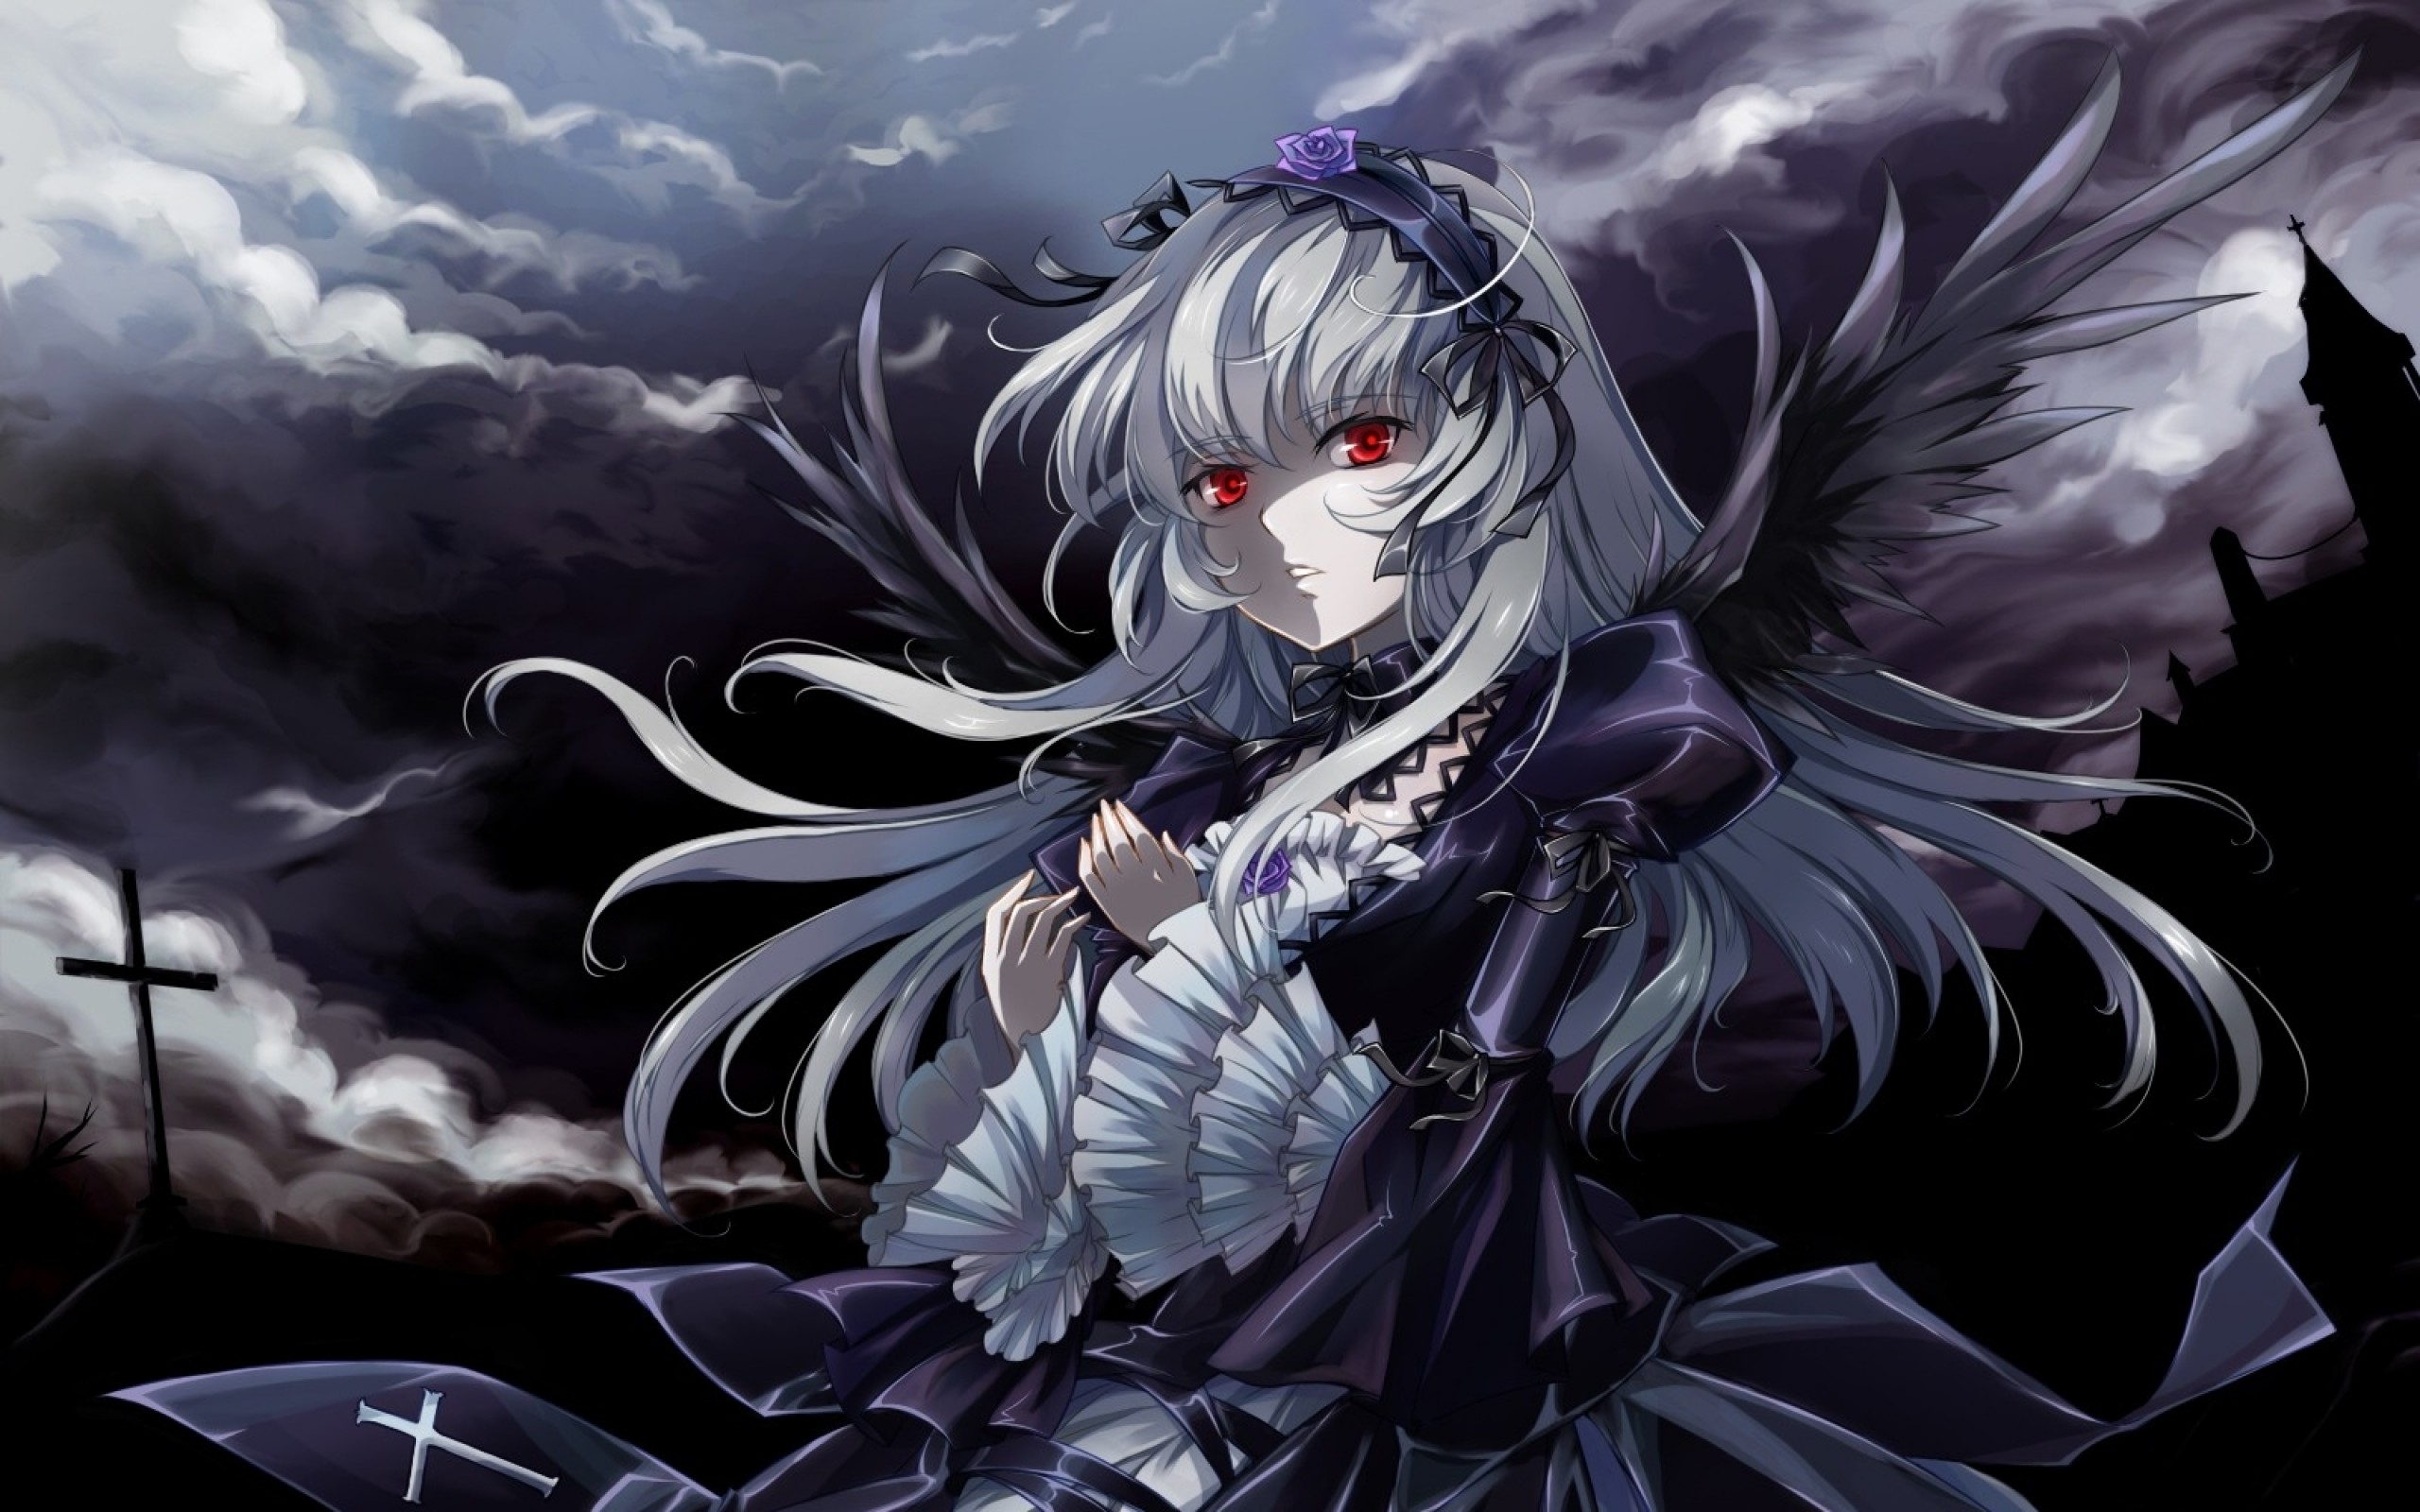 2560x1600 Hd Gothic Anime Image Hd Desktop Wallpapers   Gothic